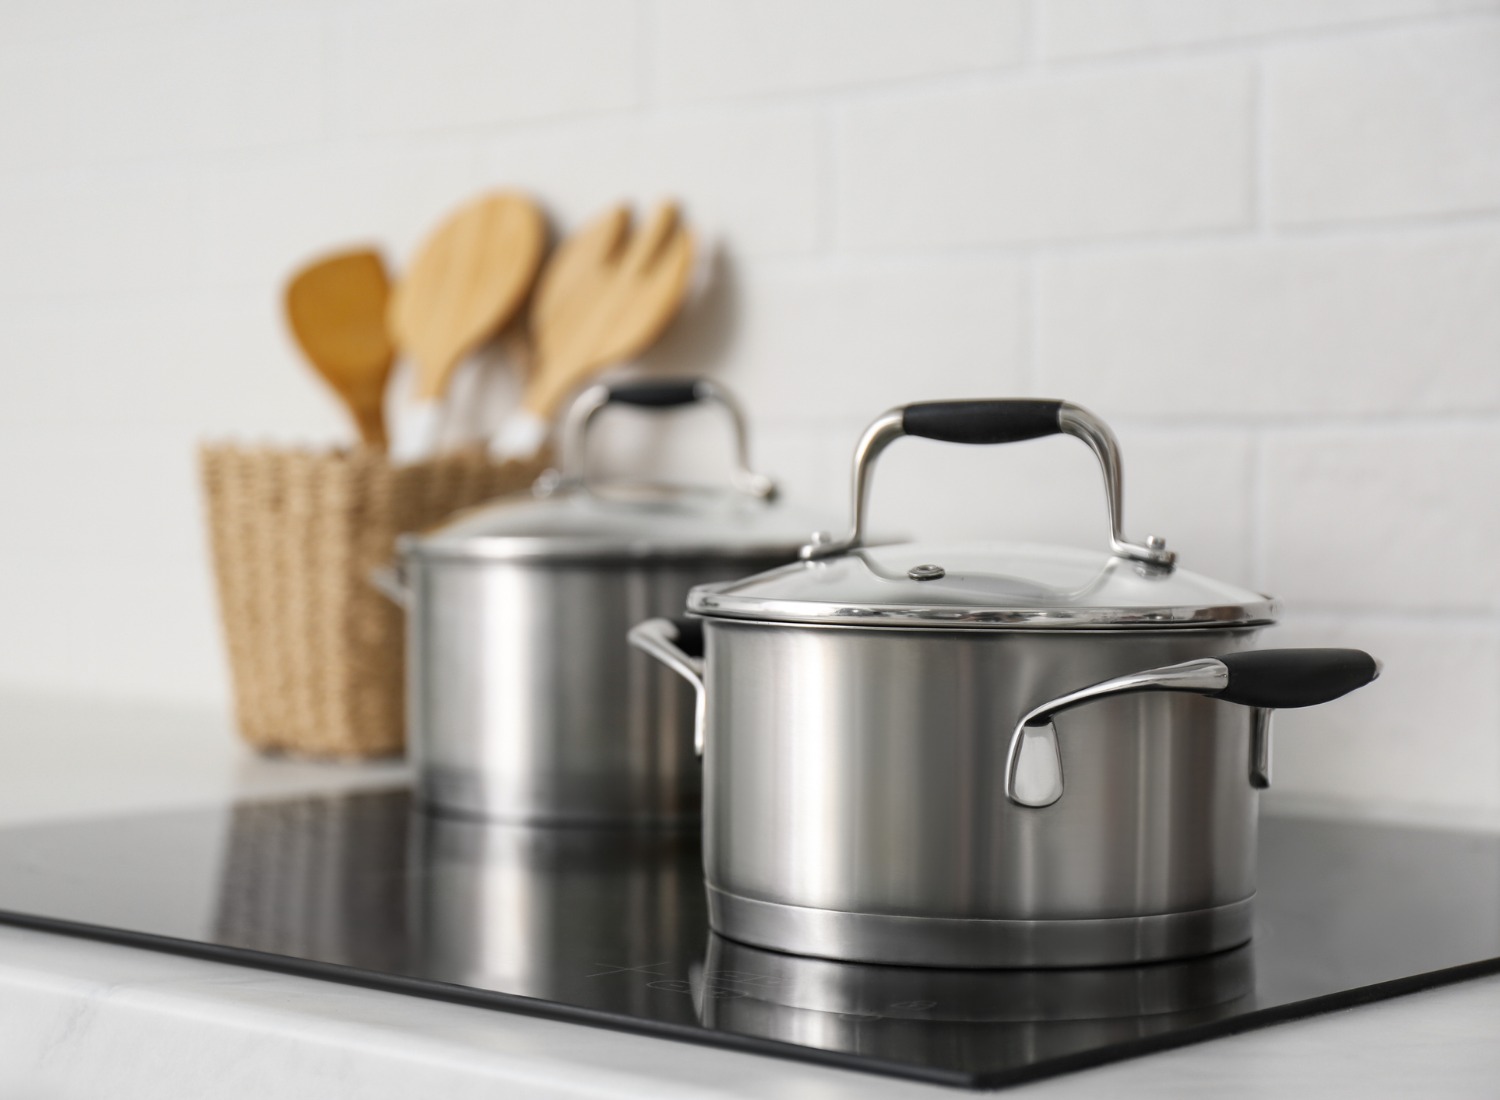 Best Induction Cookware 2023 — Best Induction Sets To Buy